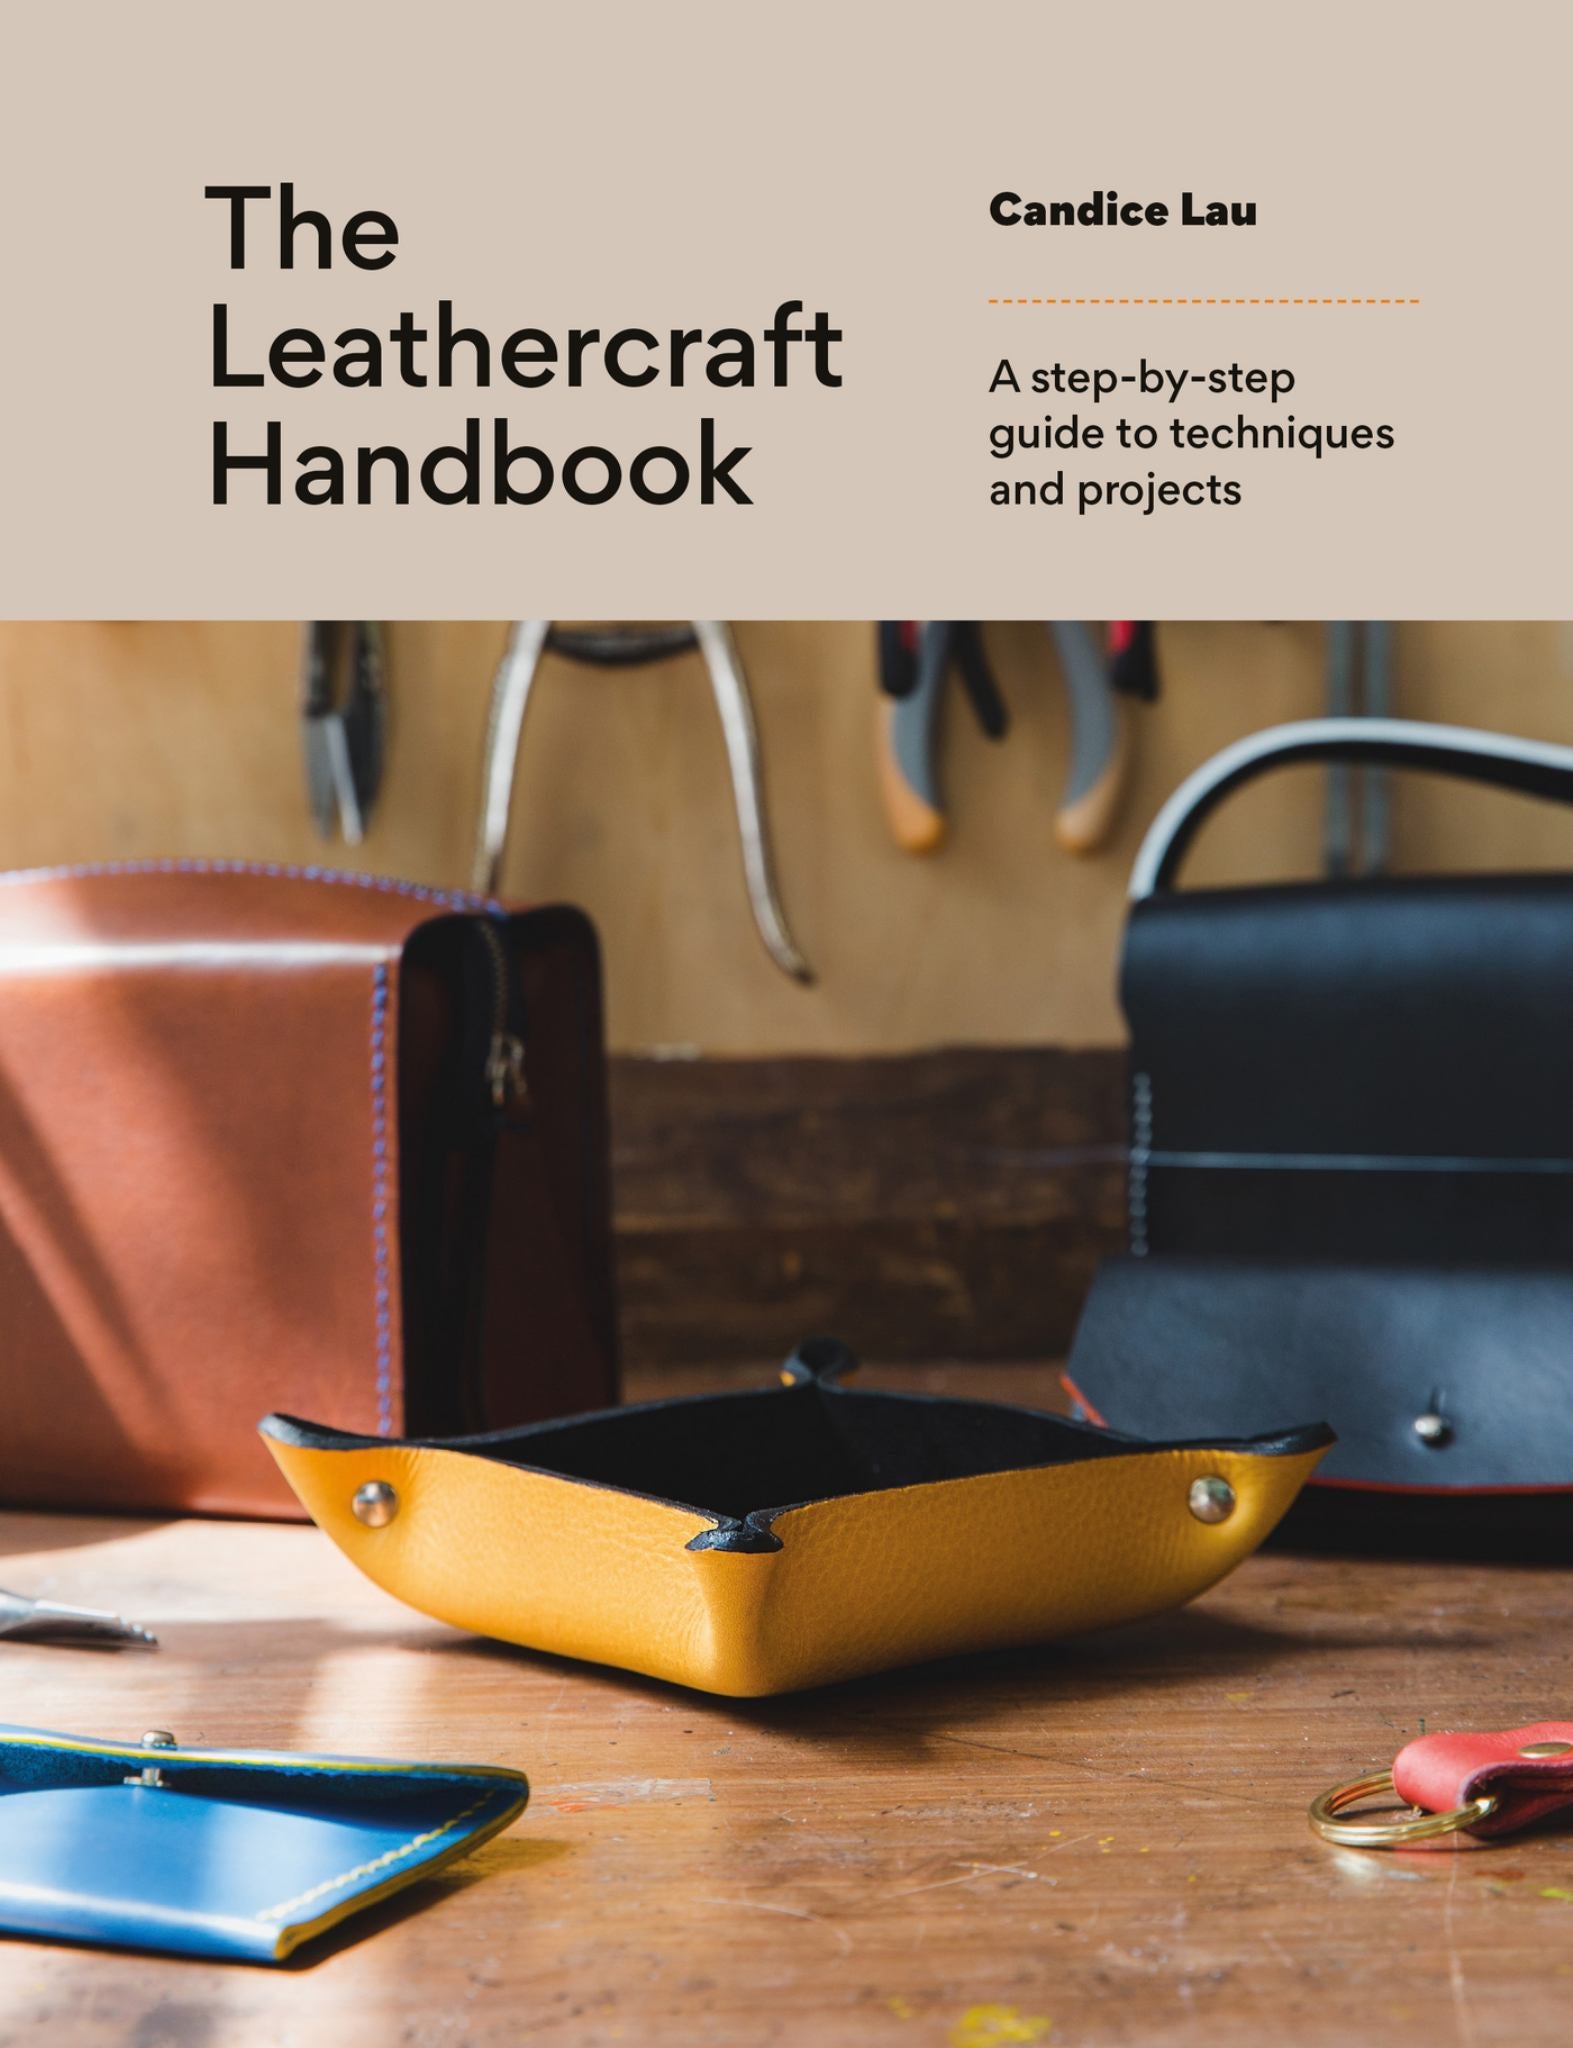 Leathercraft Handbook A Step-by-step Guide To Techniques & Projects